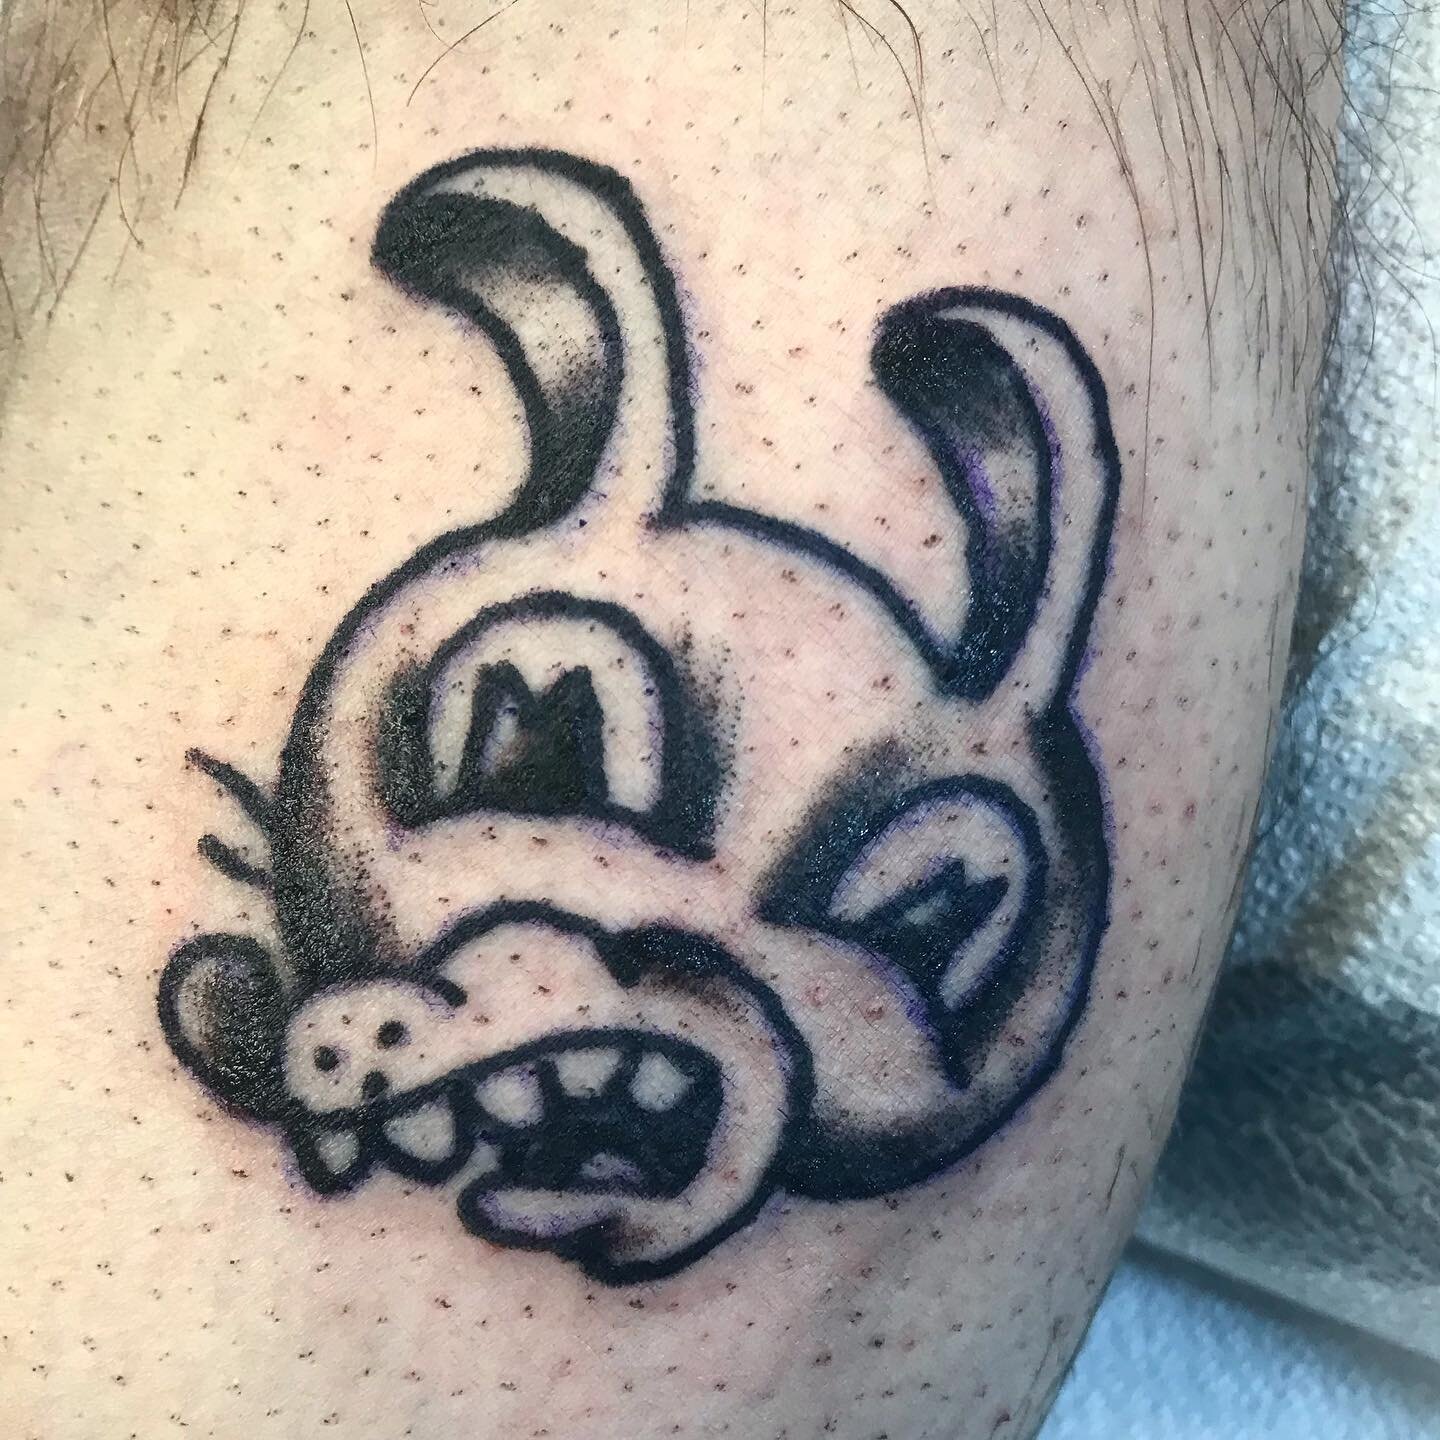 Thank you kathandrear37 for letting me do this flintstones tattoo on you  hope to see you again tatt tattoo tattoos tattooartist  Instagram